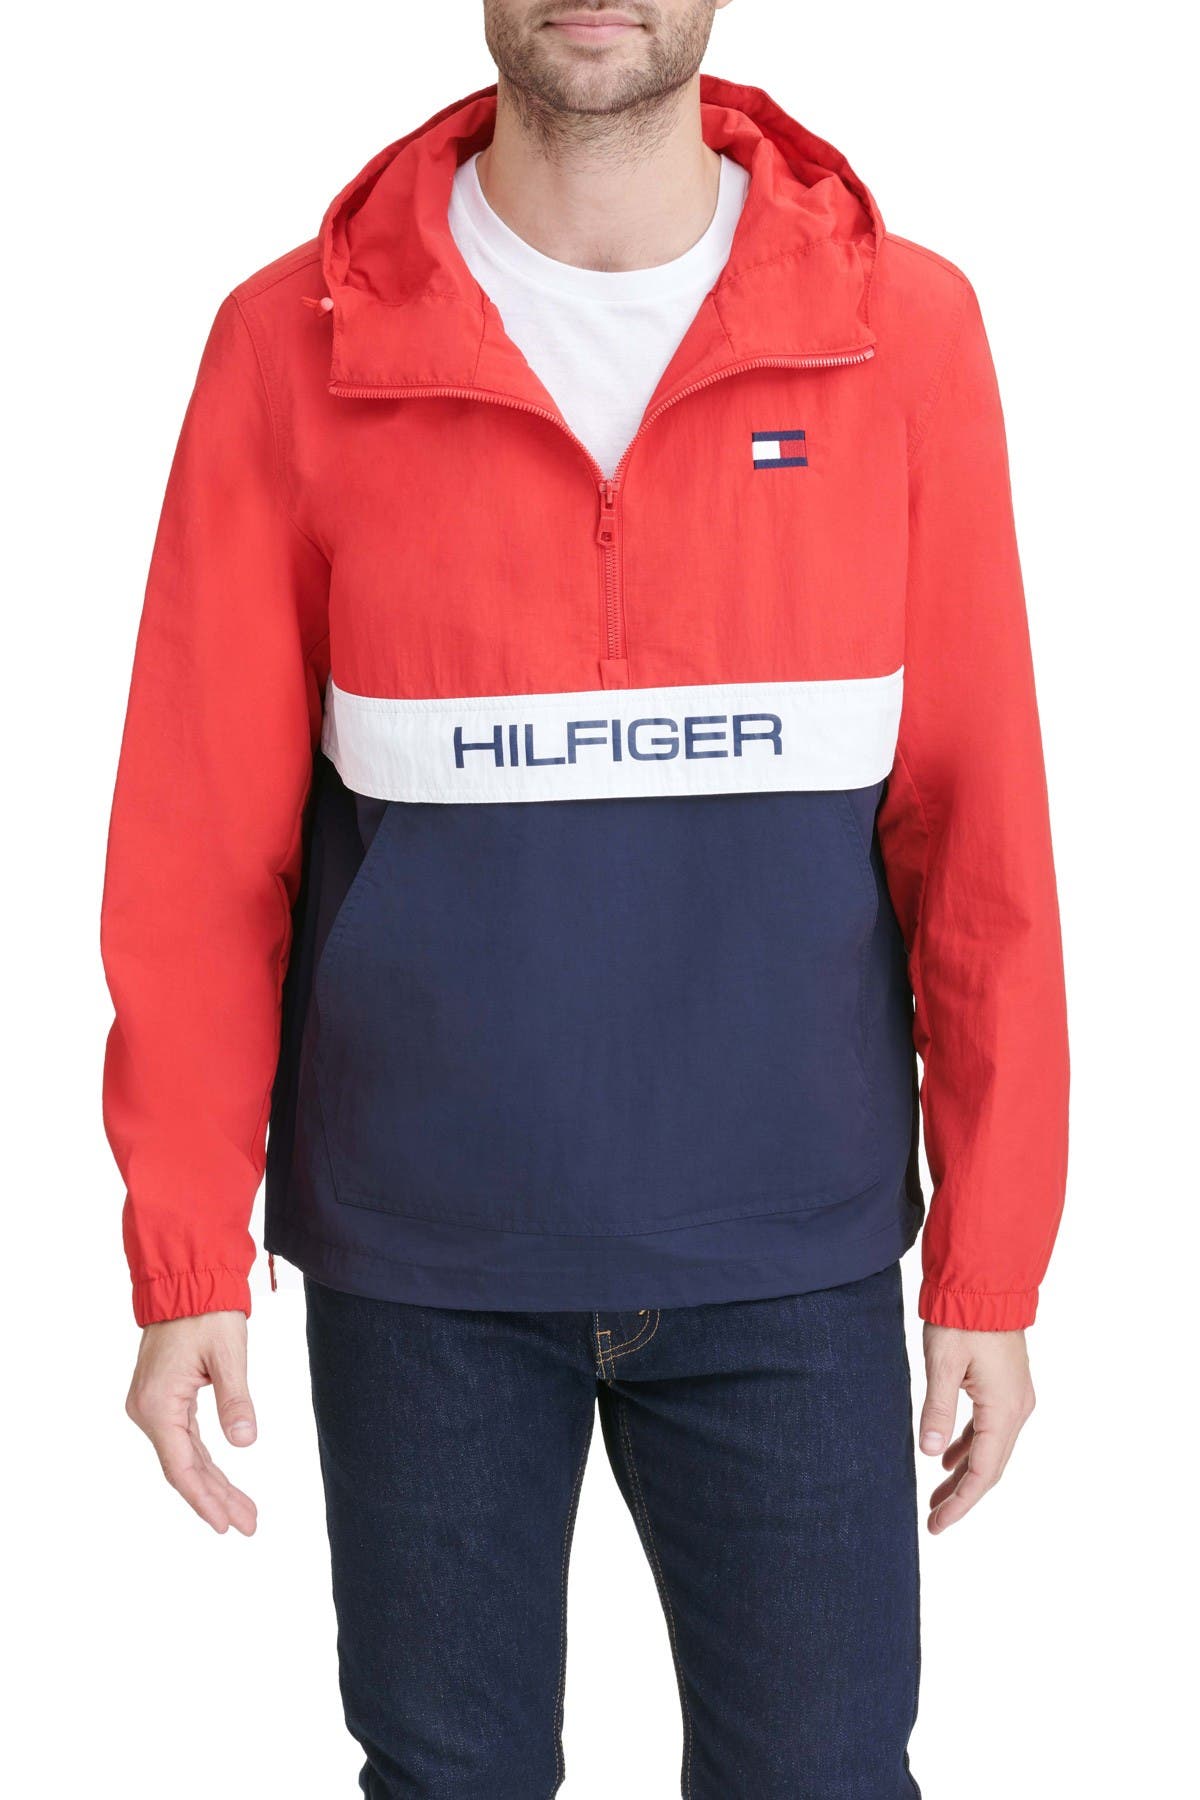 tommy hilfiger water and wind resistant